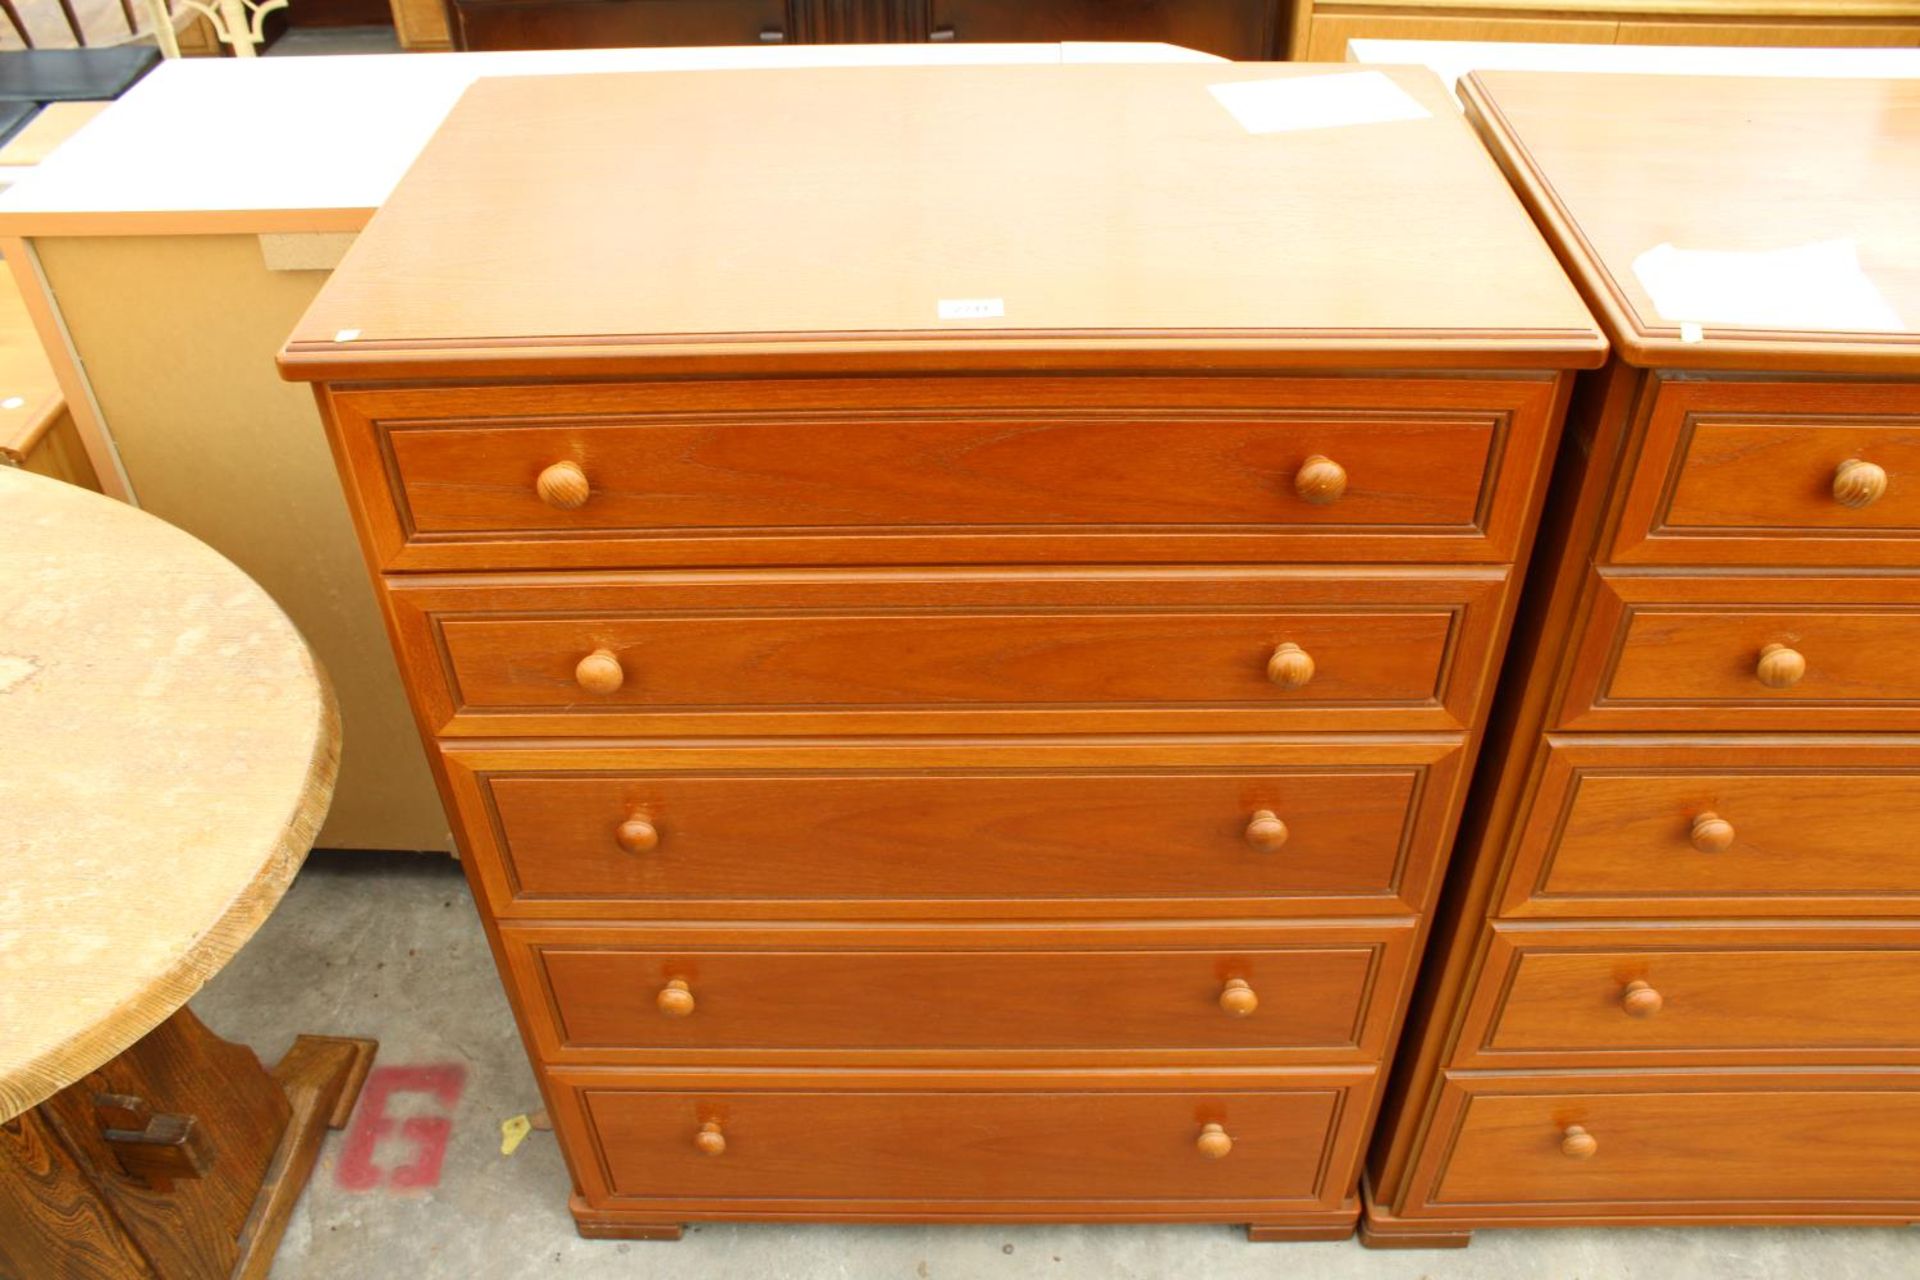 A MODERN STAG CHEST OF FIVE DRAWERS